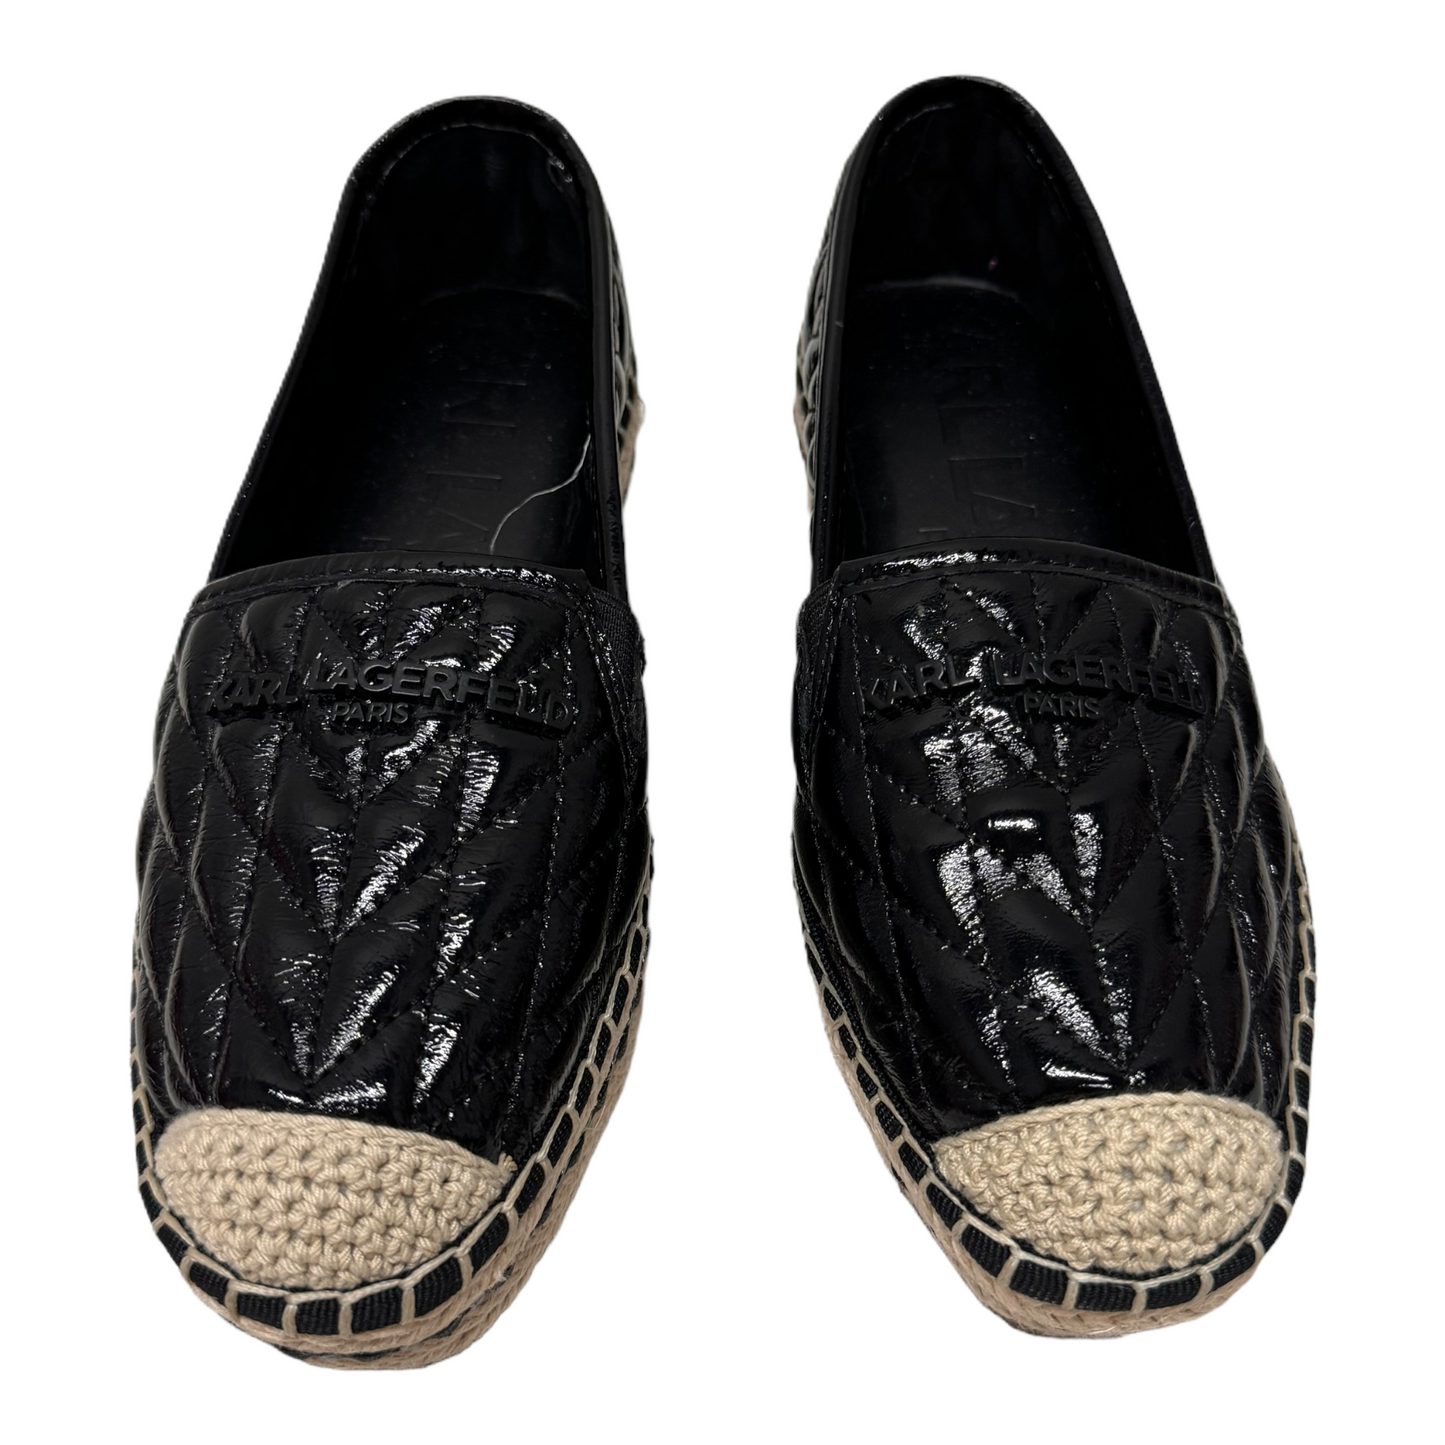 Shoes Flats Espadrille By Karl Lagerfeld  Size: 5